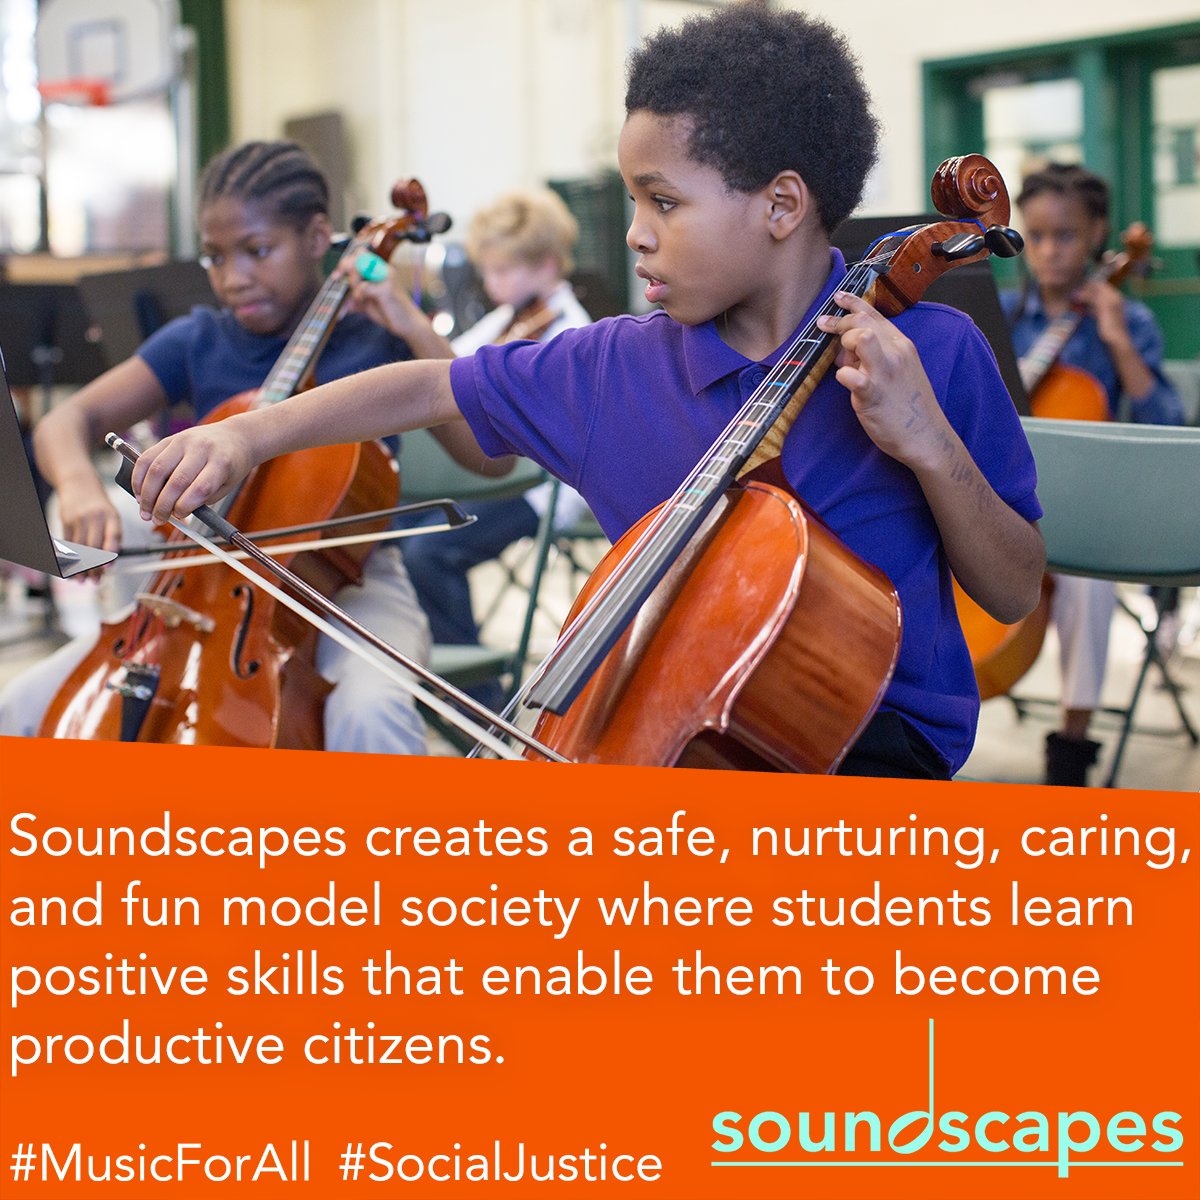 Learn more about Soundscapes ---> ow.ly/70fE30ez5nd #Soundscapes #SocialJustice #MusicForAll #ElSistemaUSA